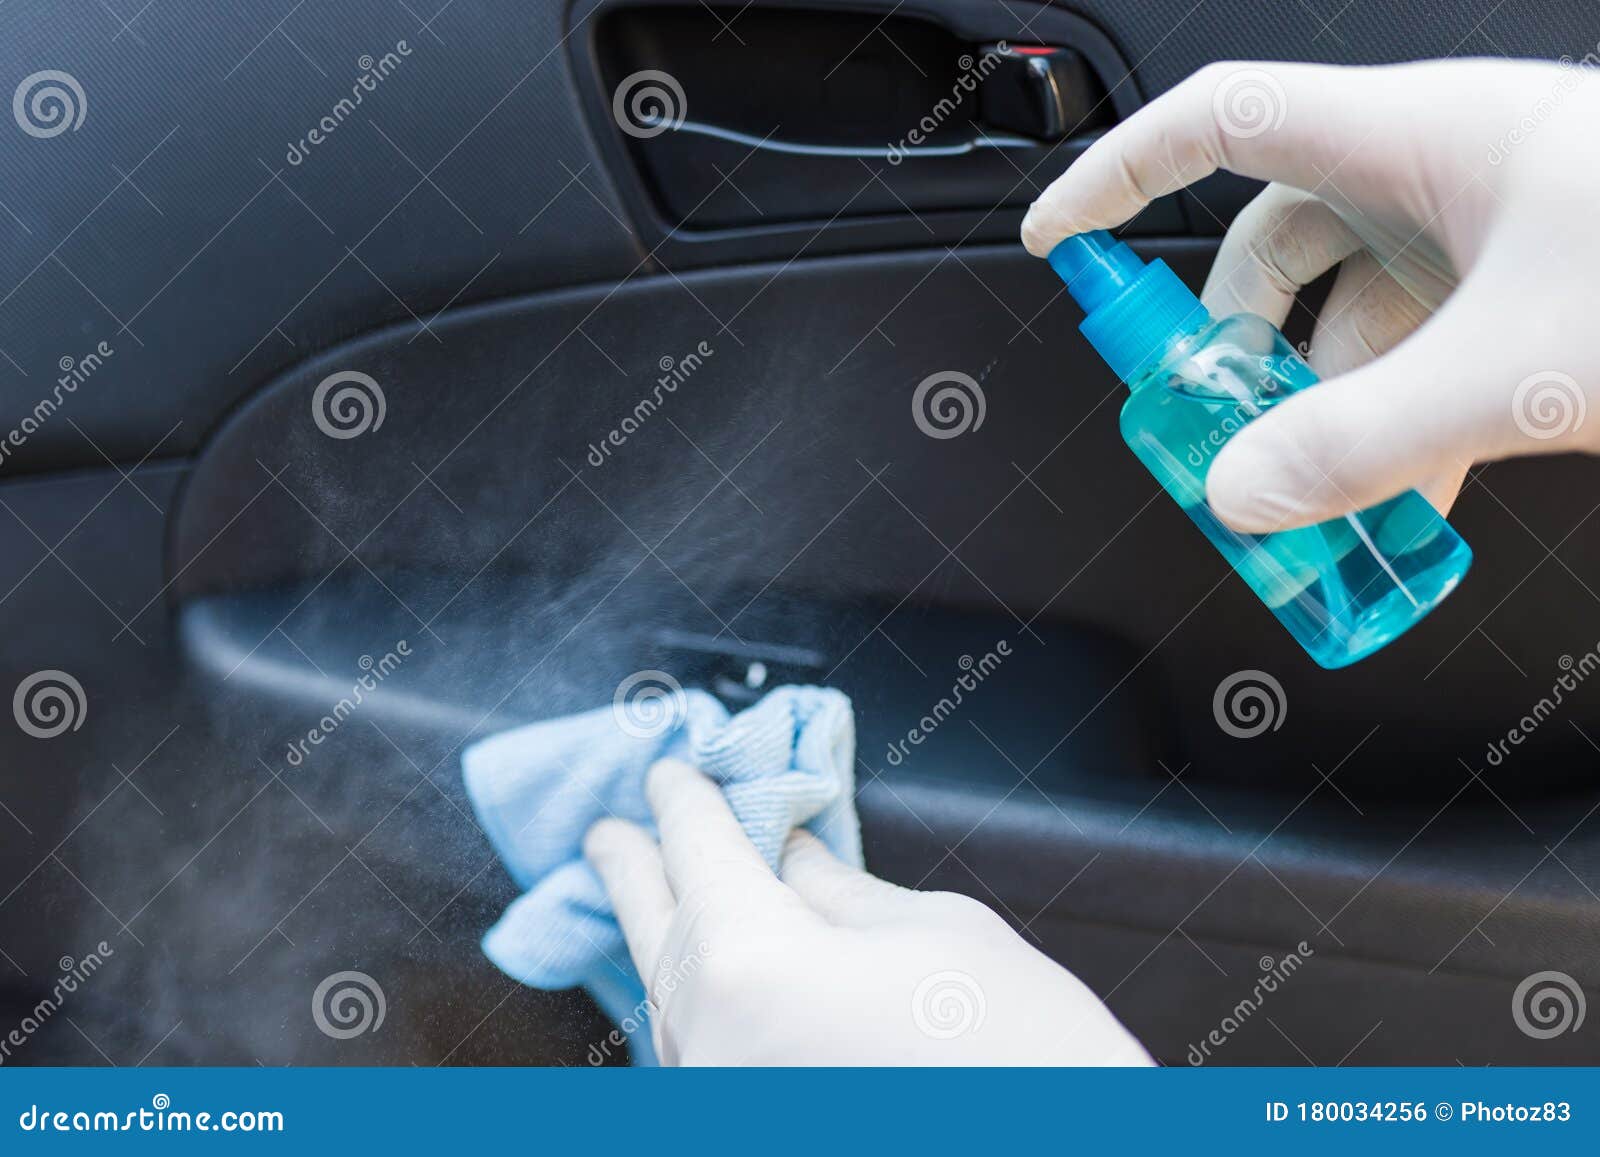 How to remove Paint from car. He clean the car